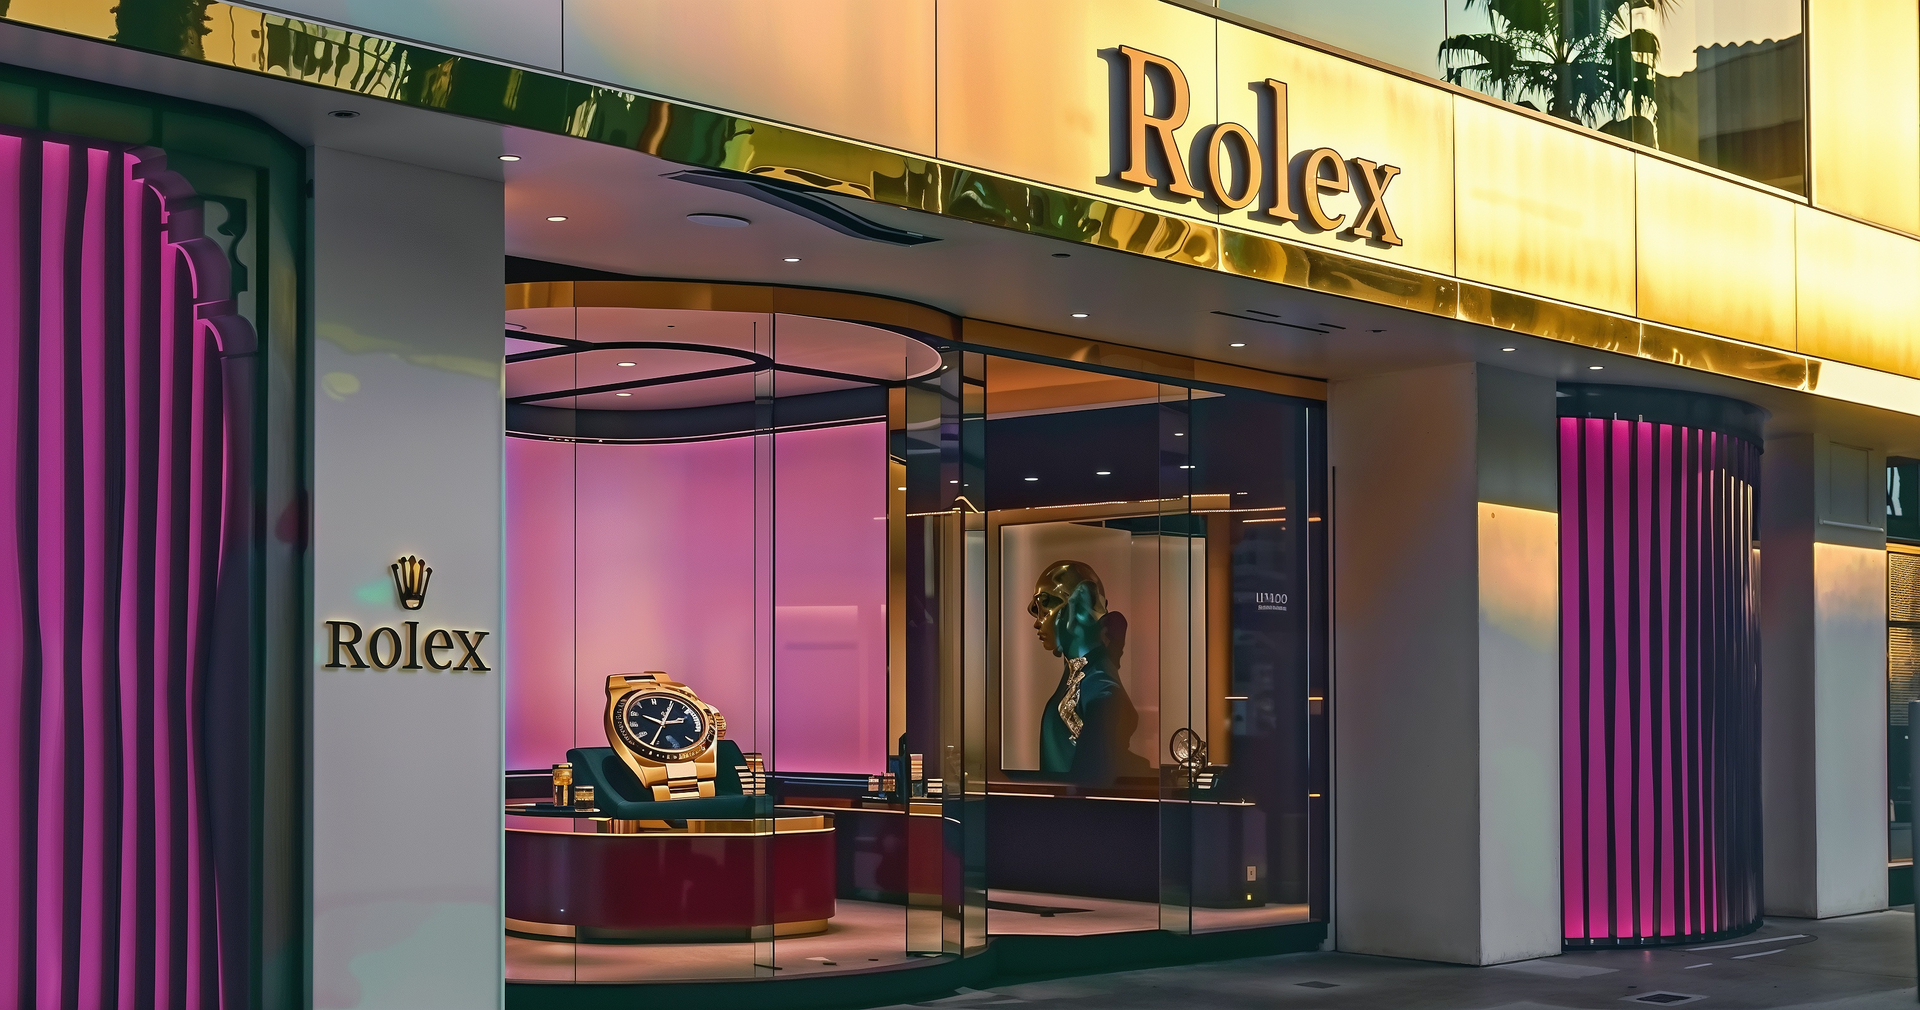 Rolex for watches is an example of a fanciful trademark.